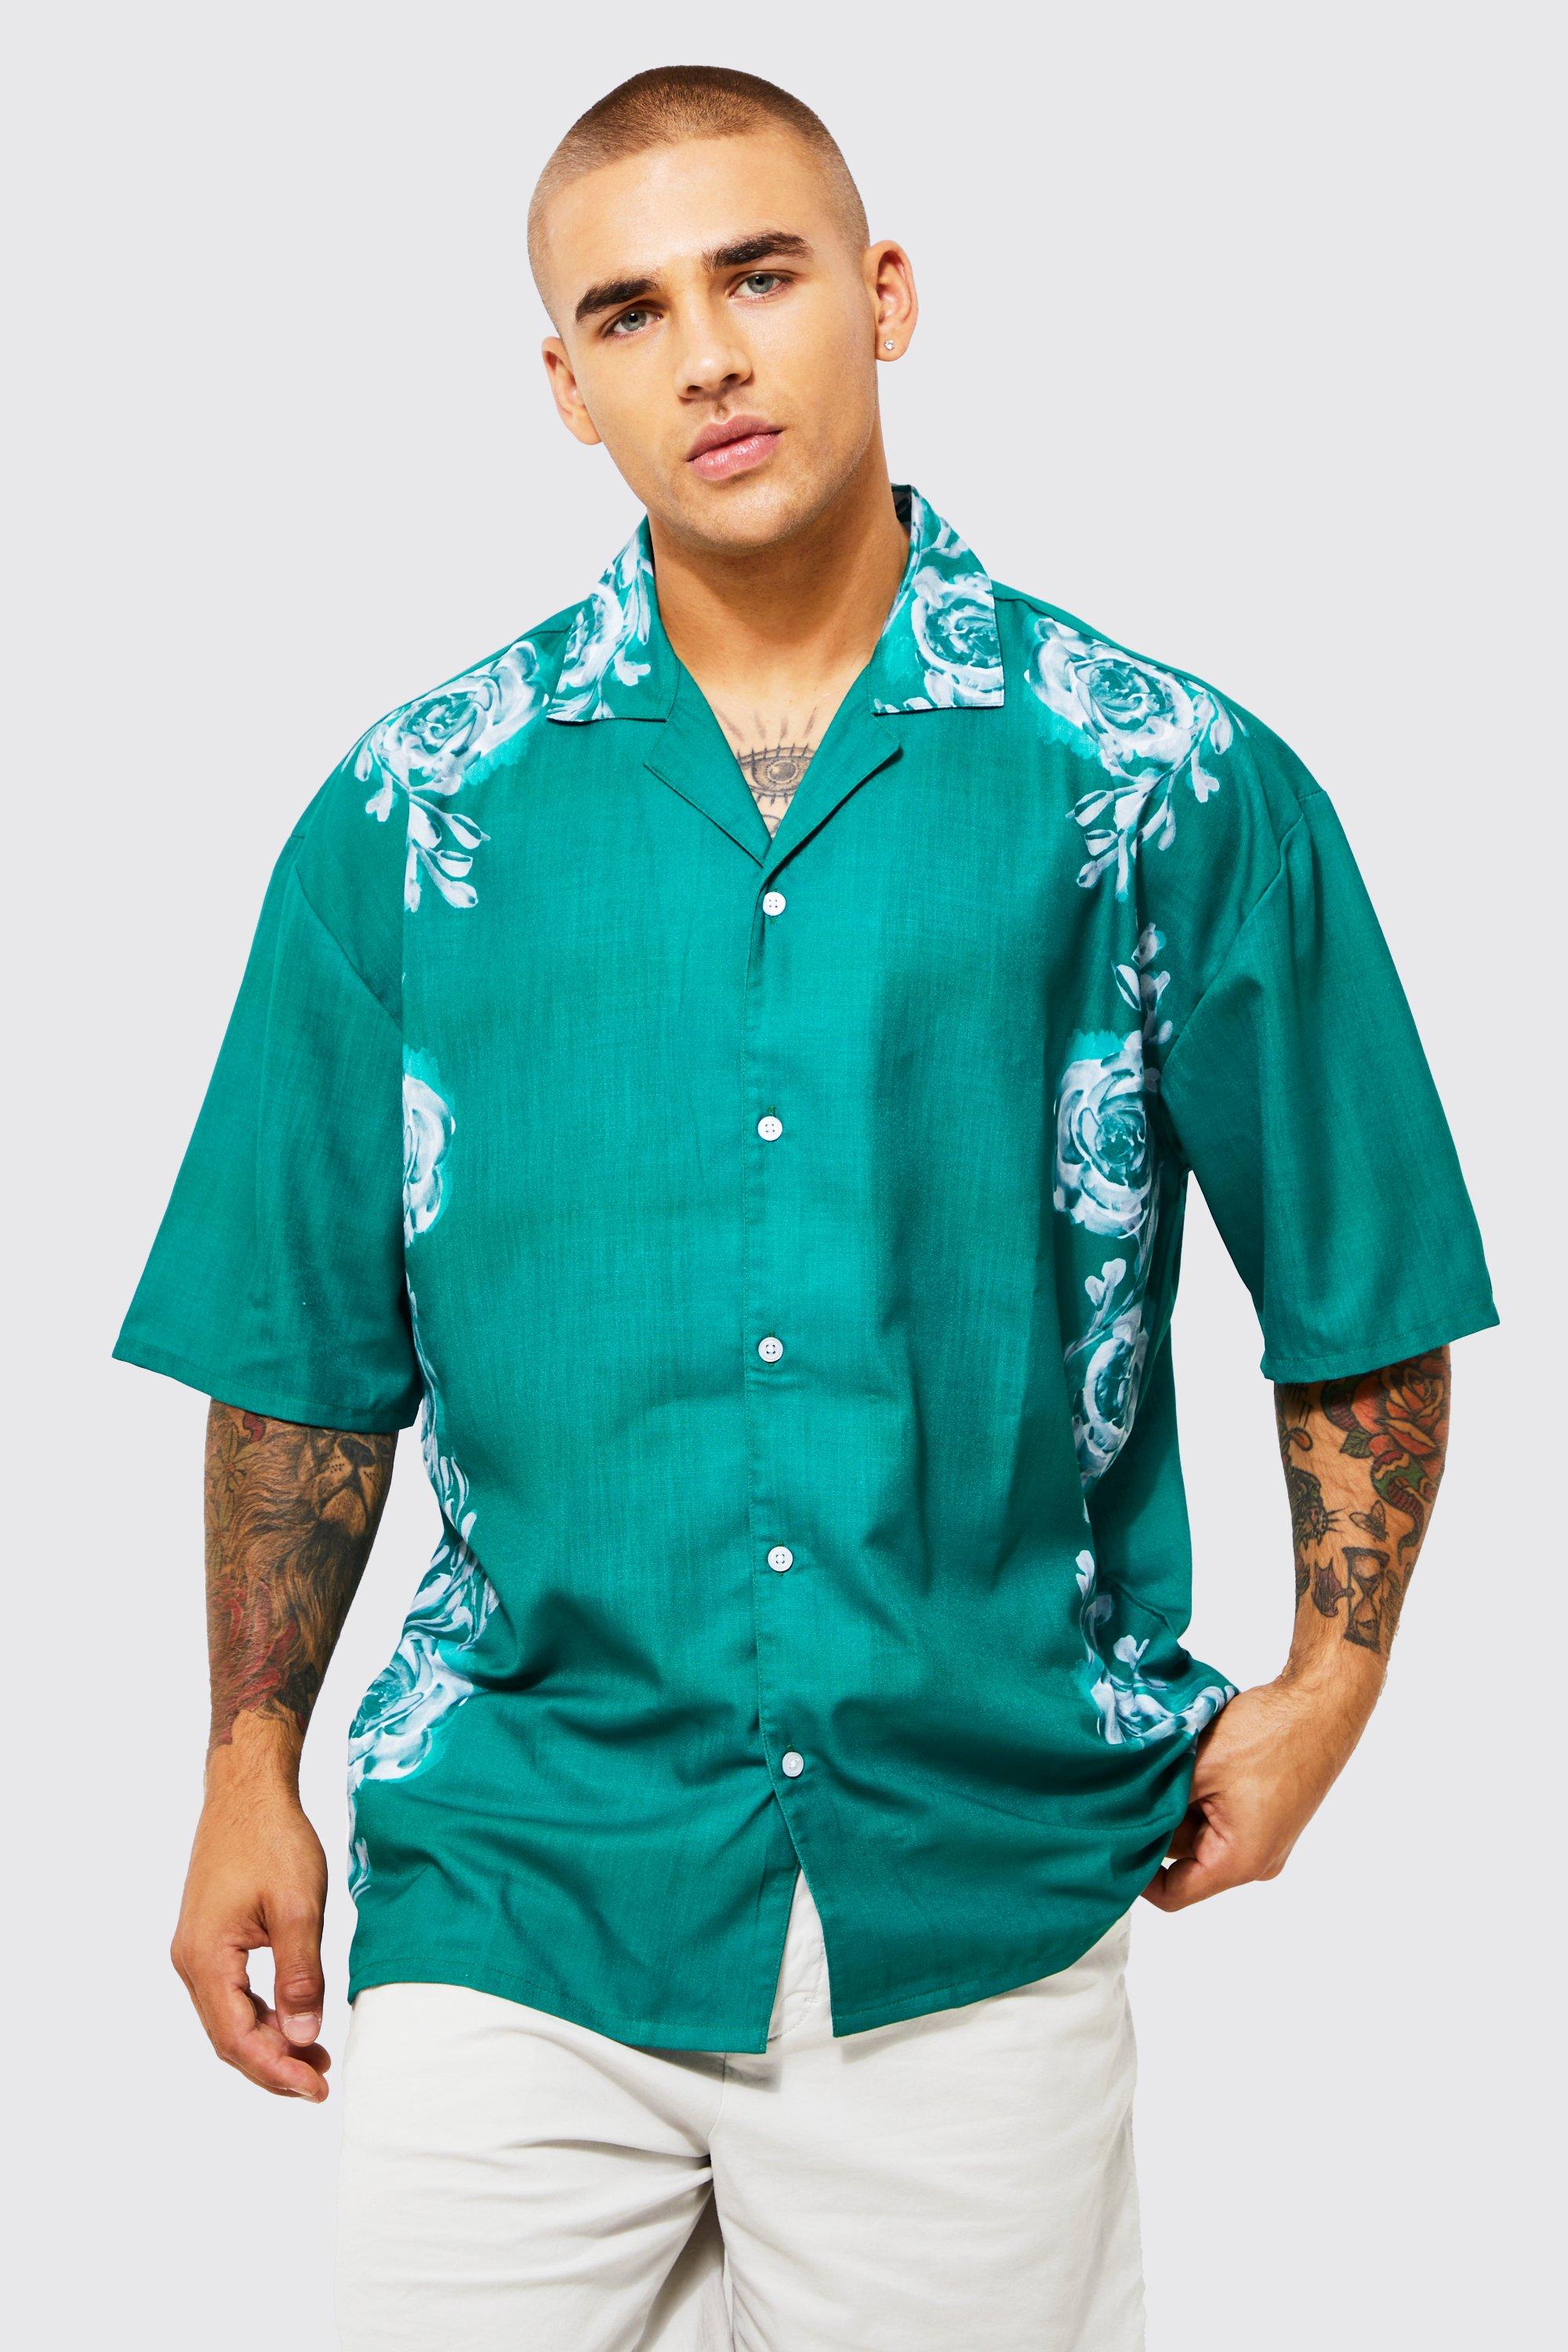 Men's Oversized Boxy Floral Placement Print Shirt - Green - L, Green